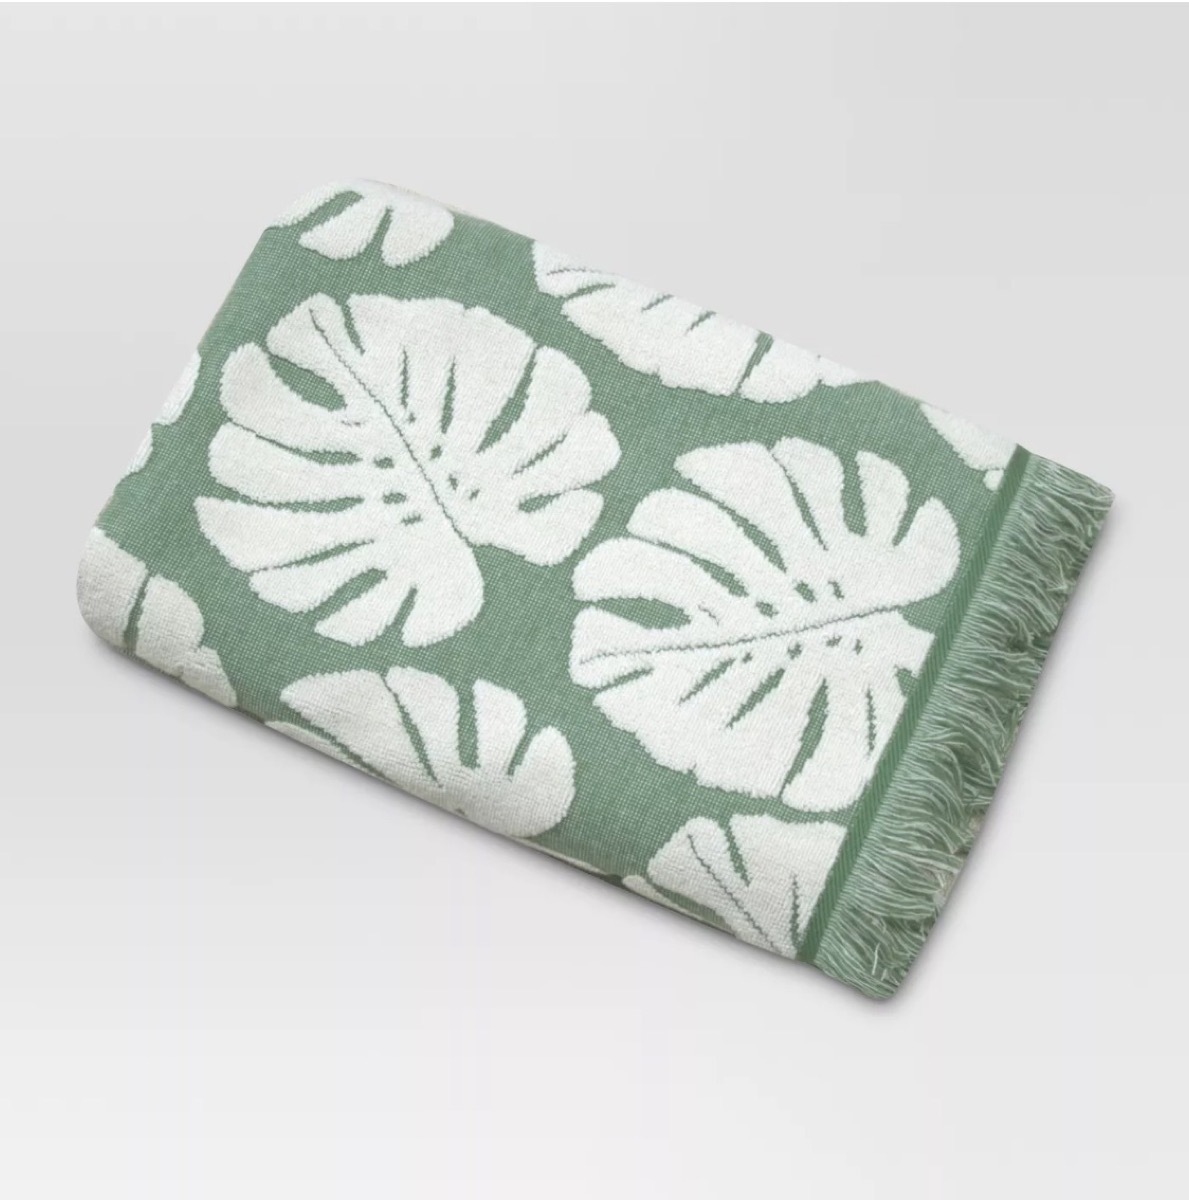 green bath towel with white leaves on it, bathroom accessories